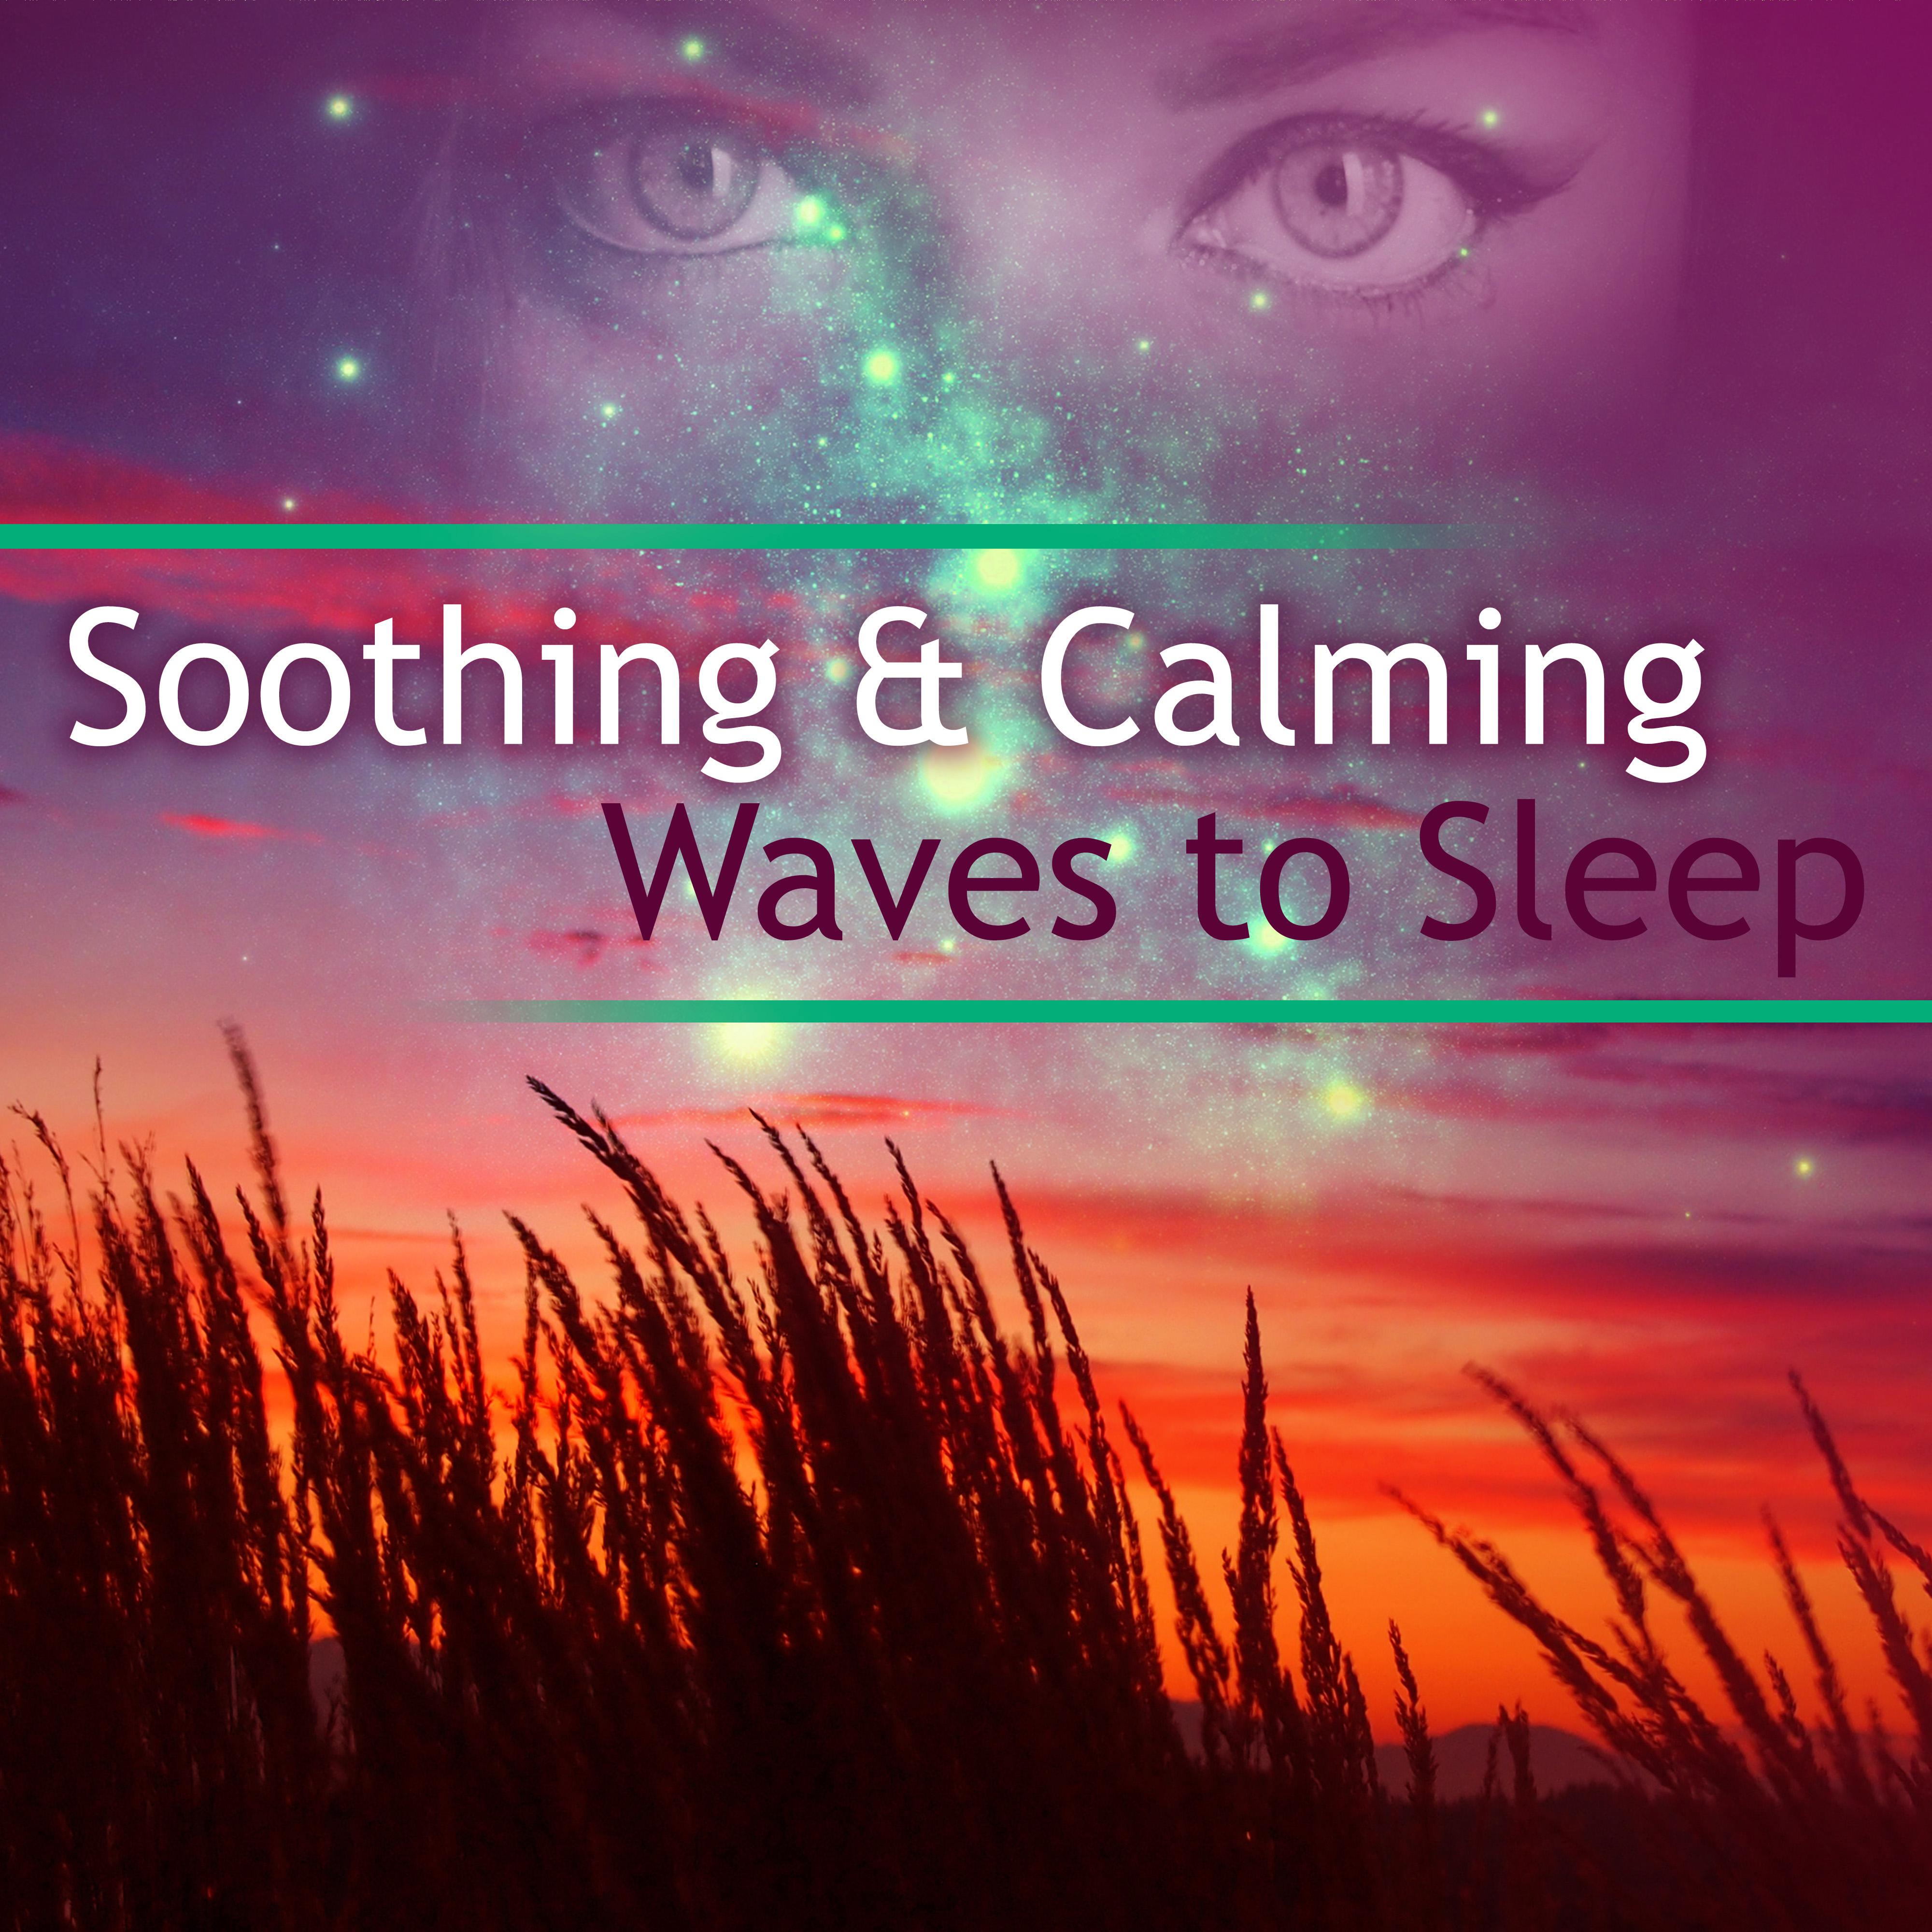 Soothing & Calming Waves to Sleep – Relaxing Music, Healing Therapy, Cure Insomnia, Sleep All Night